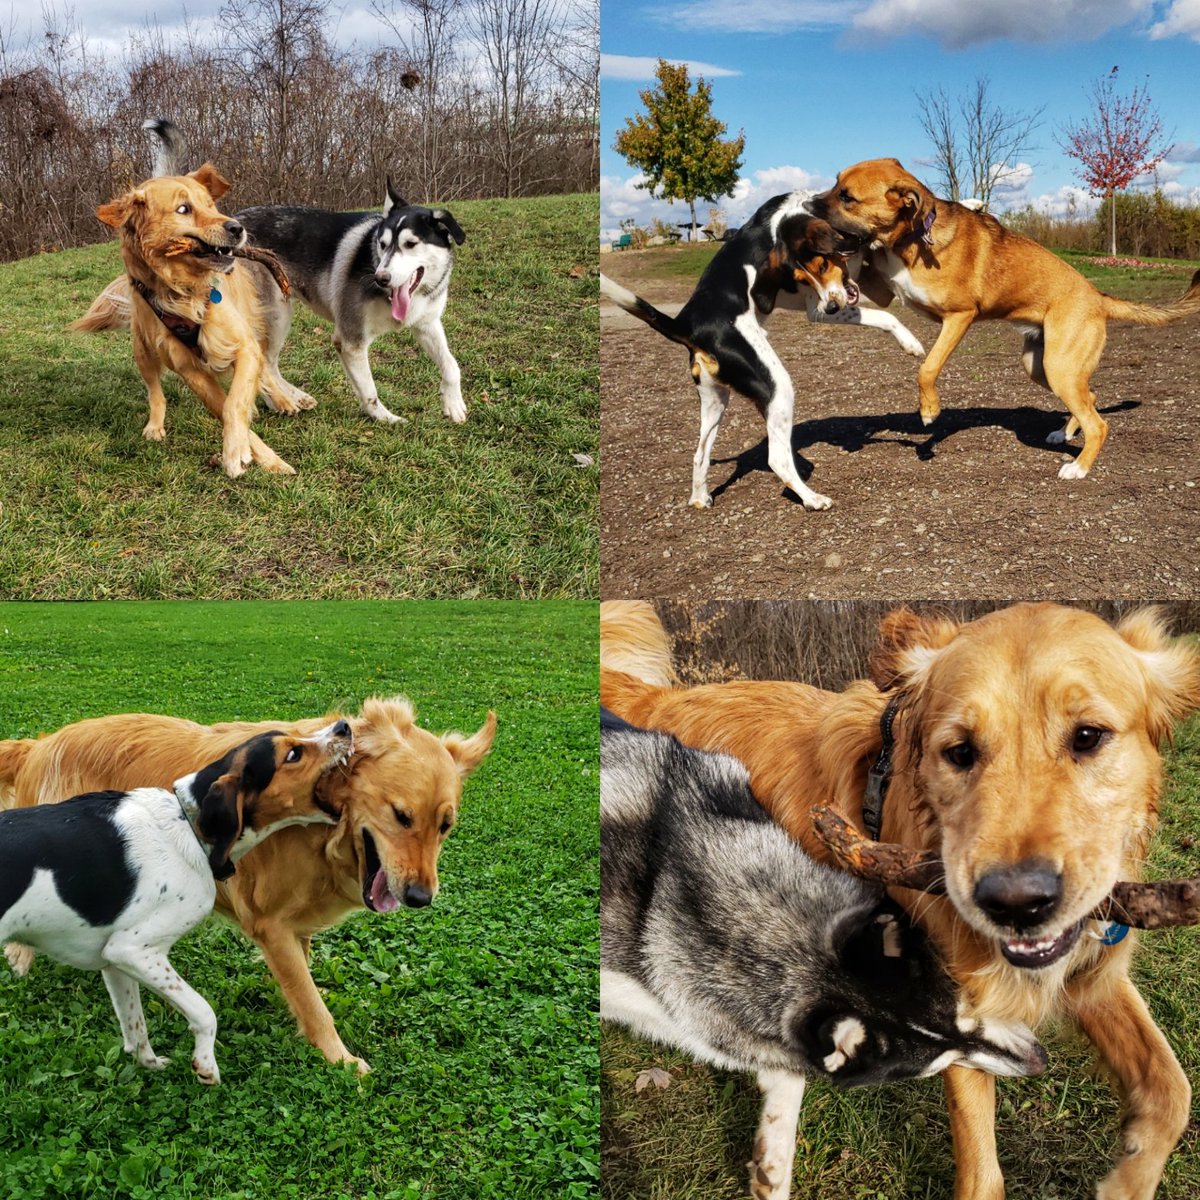 Some of our pups are #socialbutterflies who really enjoy their park time!
🐕🐾❤🐶😁
#weekendvibes #socialSaturday  #walkinthedoginwhitby #walkinthedog